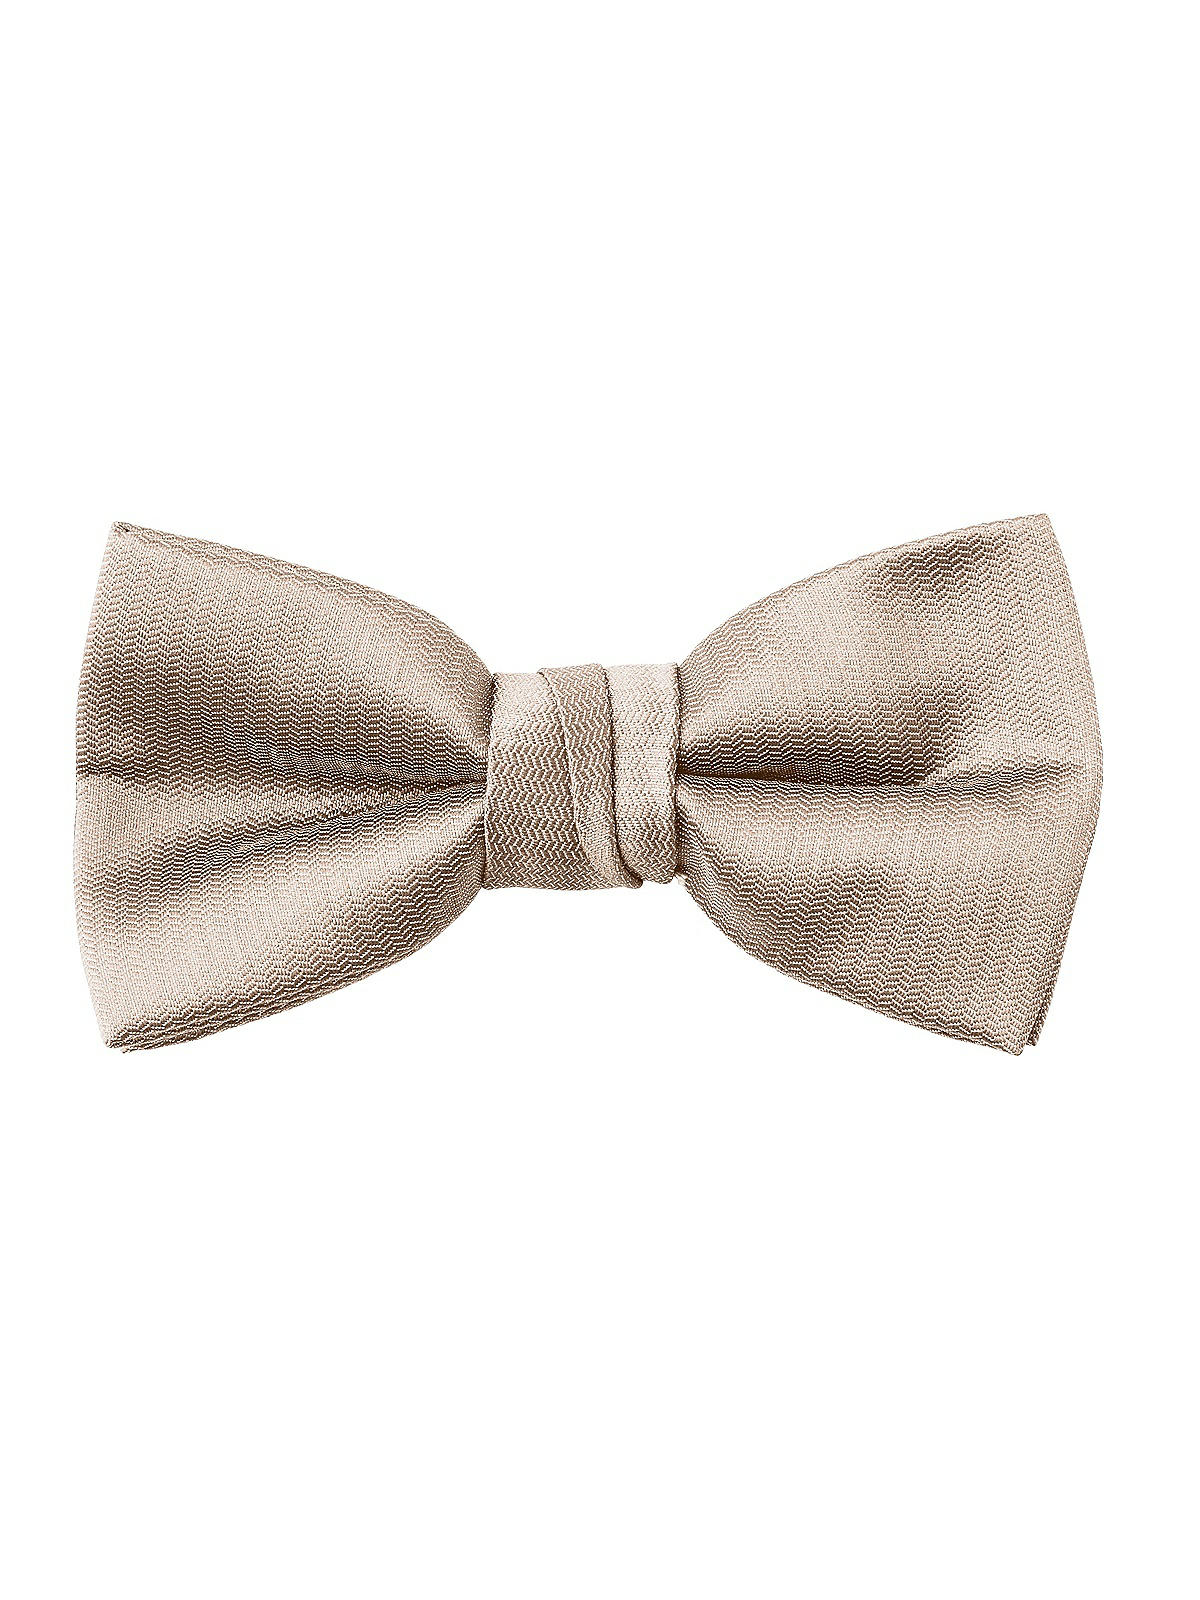 Yarn Dyed Boy's Bow-Tie | The Dessy Group